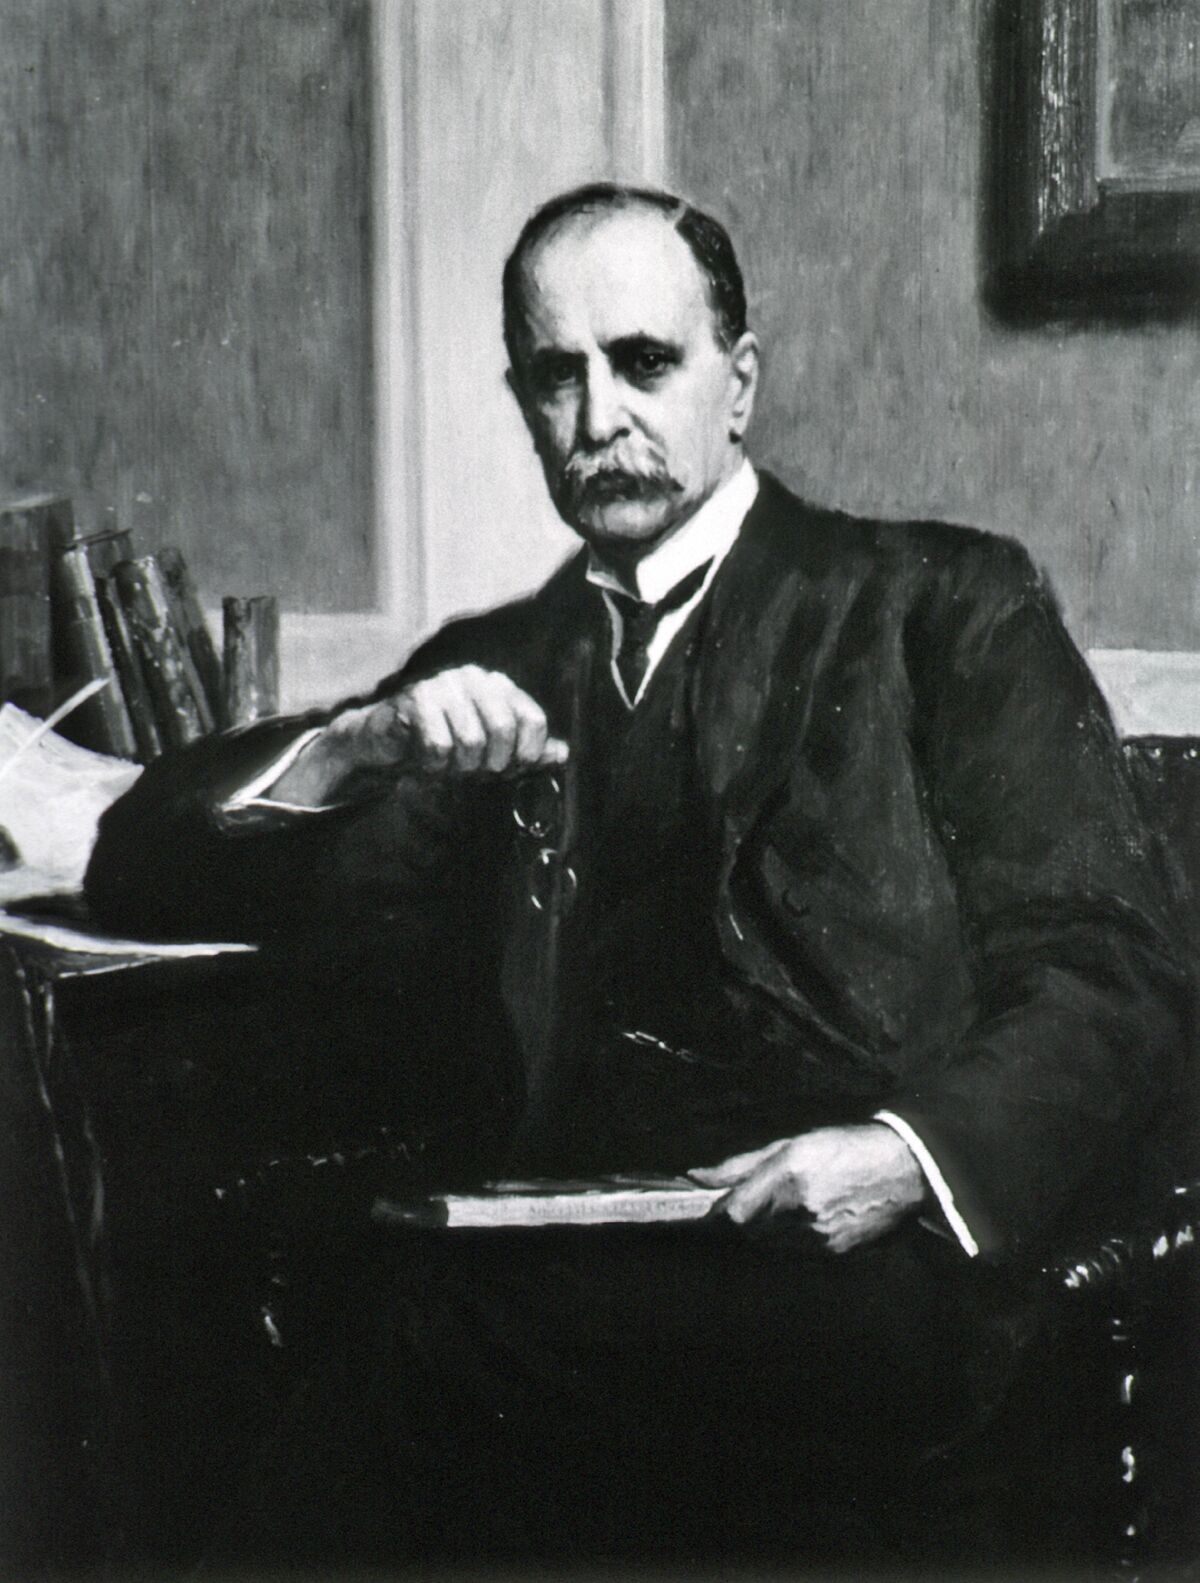 Sir William Osler, a Canadian physician and one of the four founding professors of Johns Hopkins Hospital.